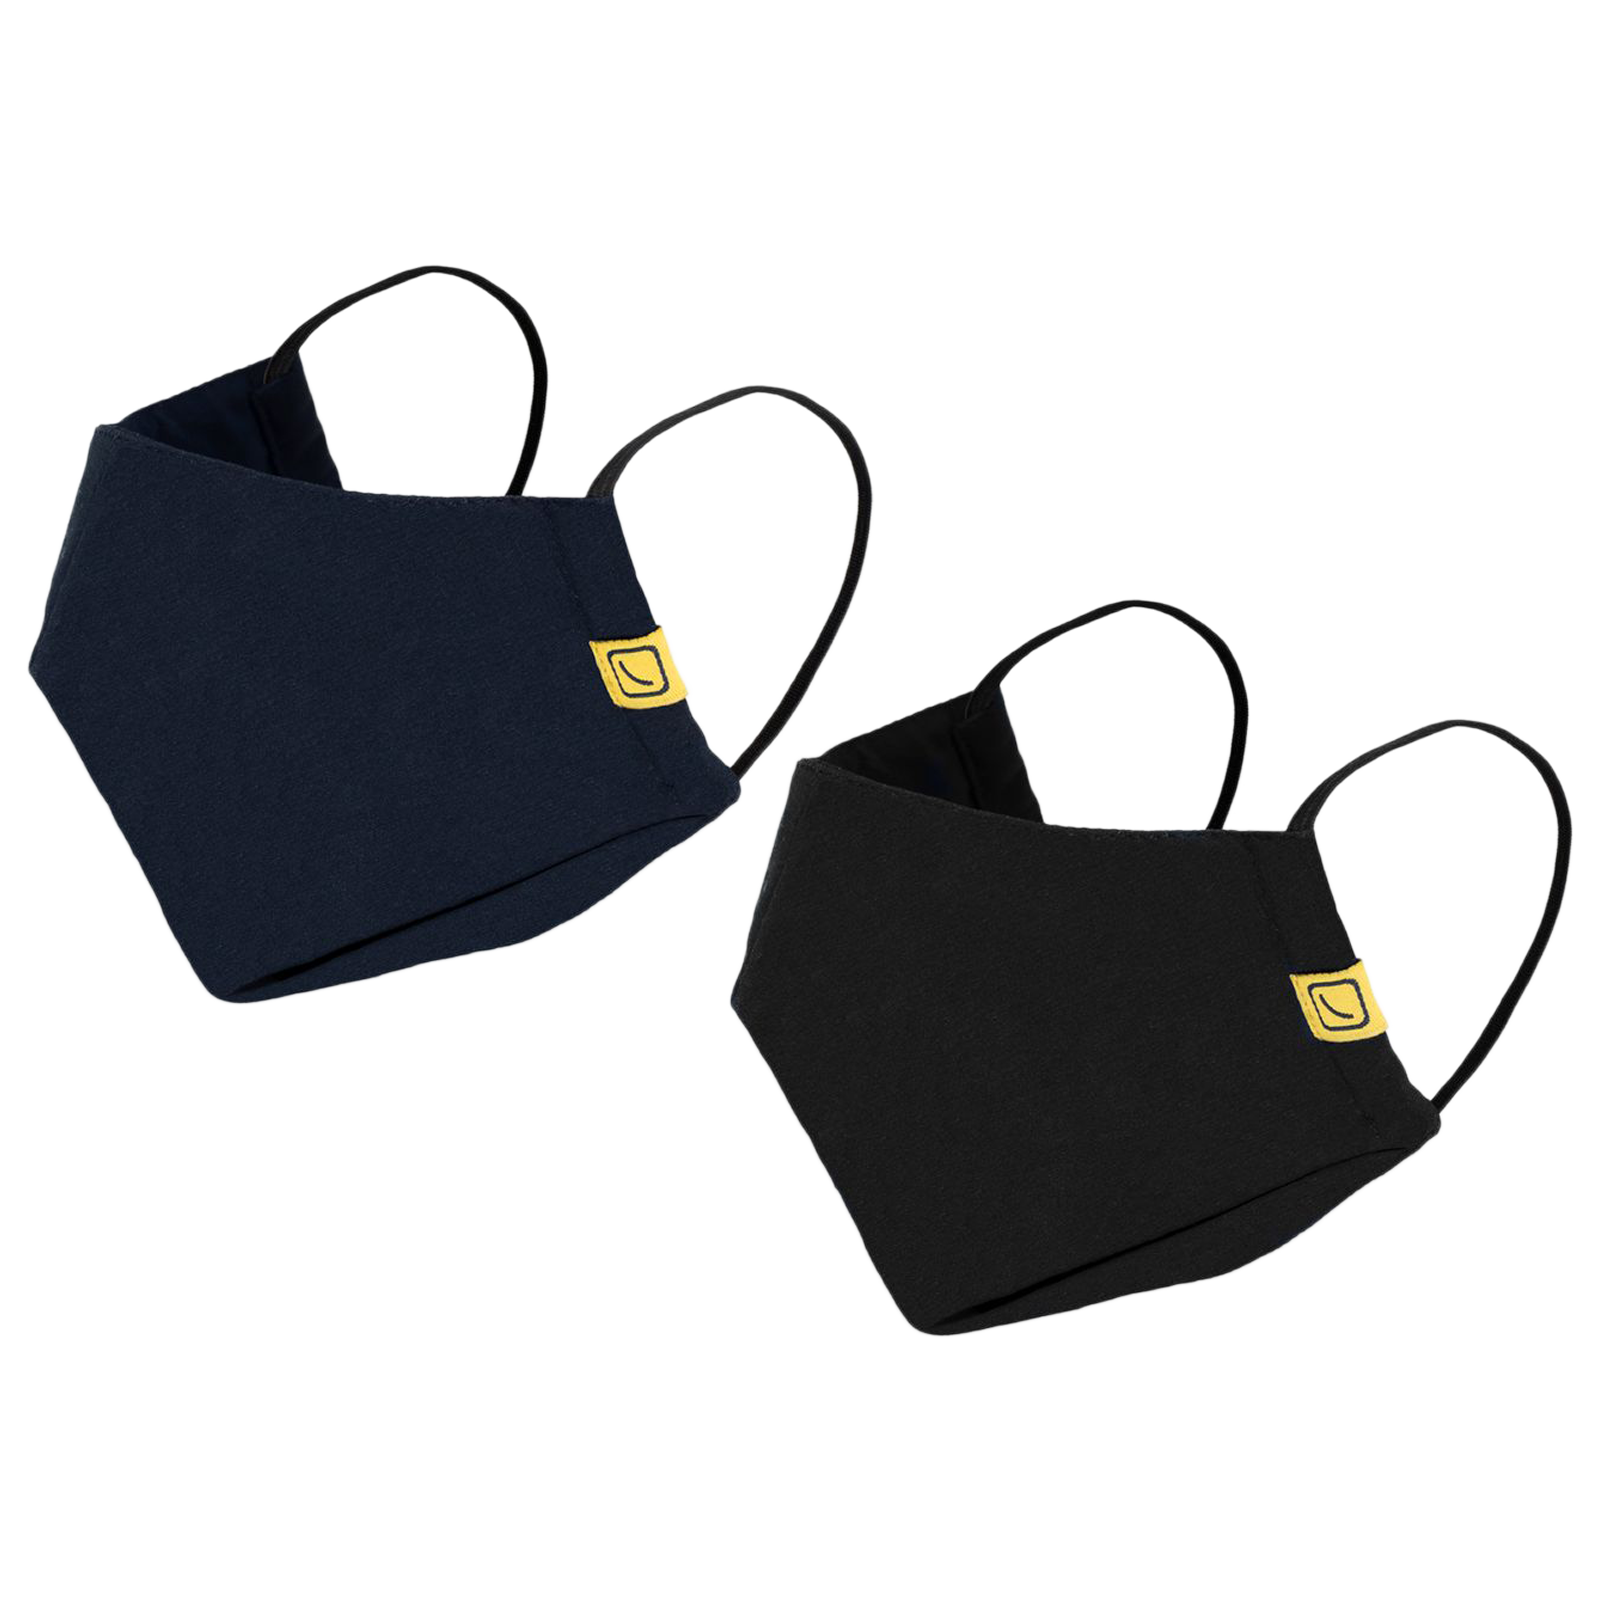 Travel Blue Cotton Face Mask (Pack of 2, 521, Black & Navy)_1